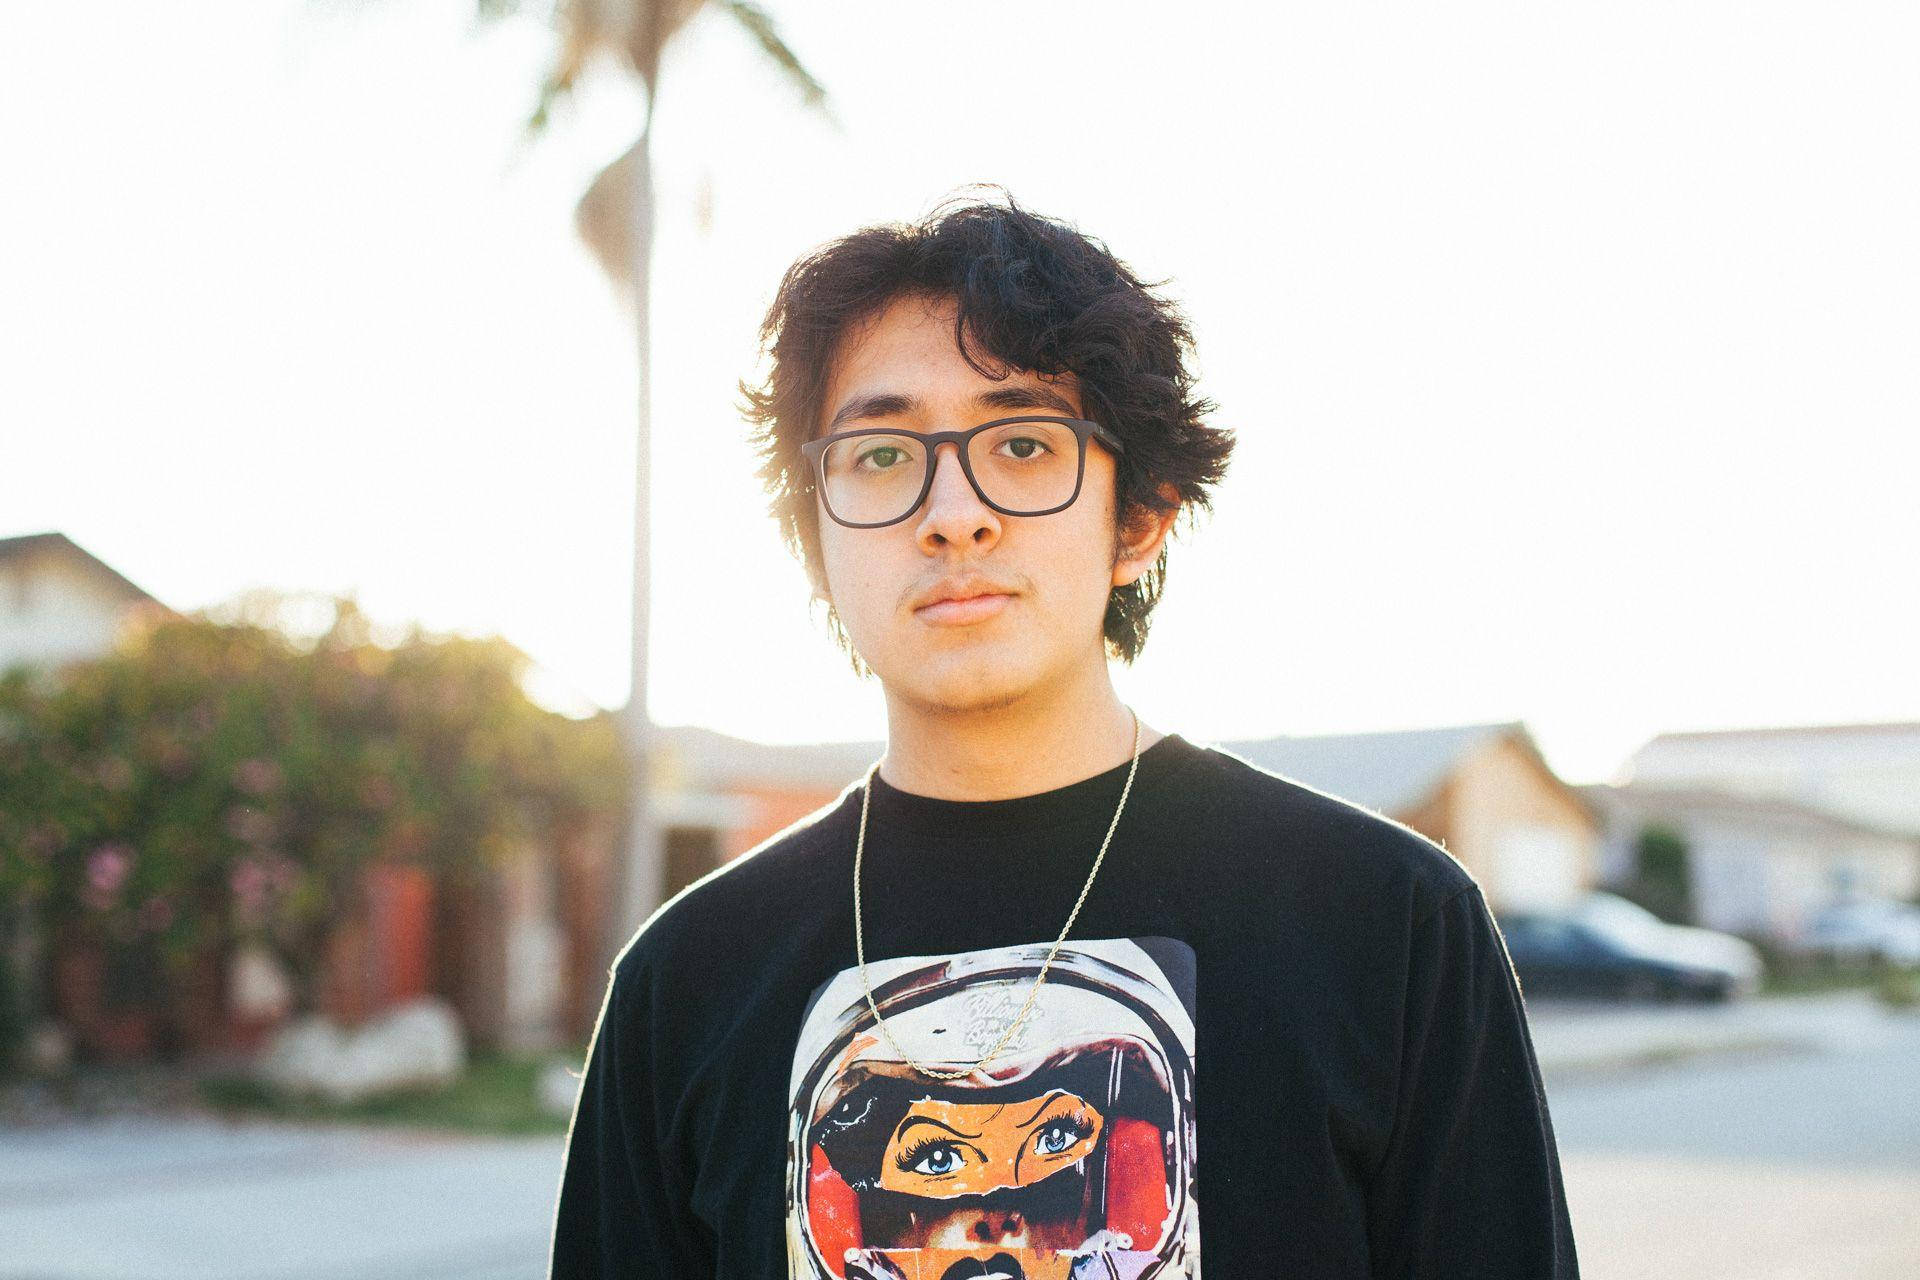 Photo Of Cuco With Cute Smile Wallpaper